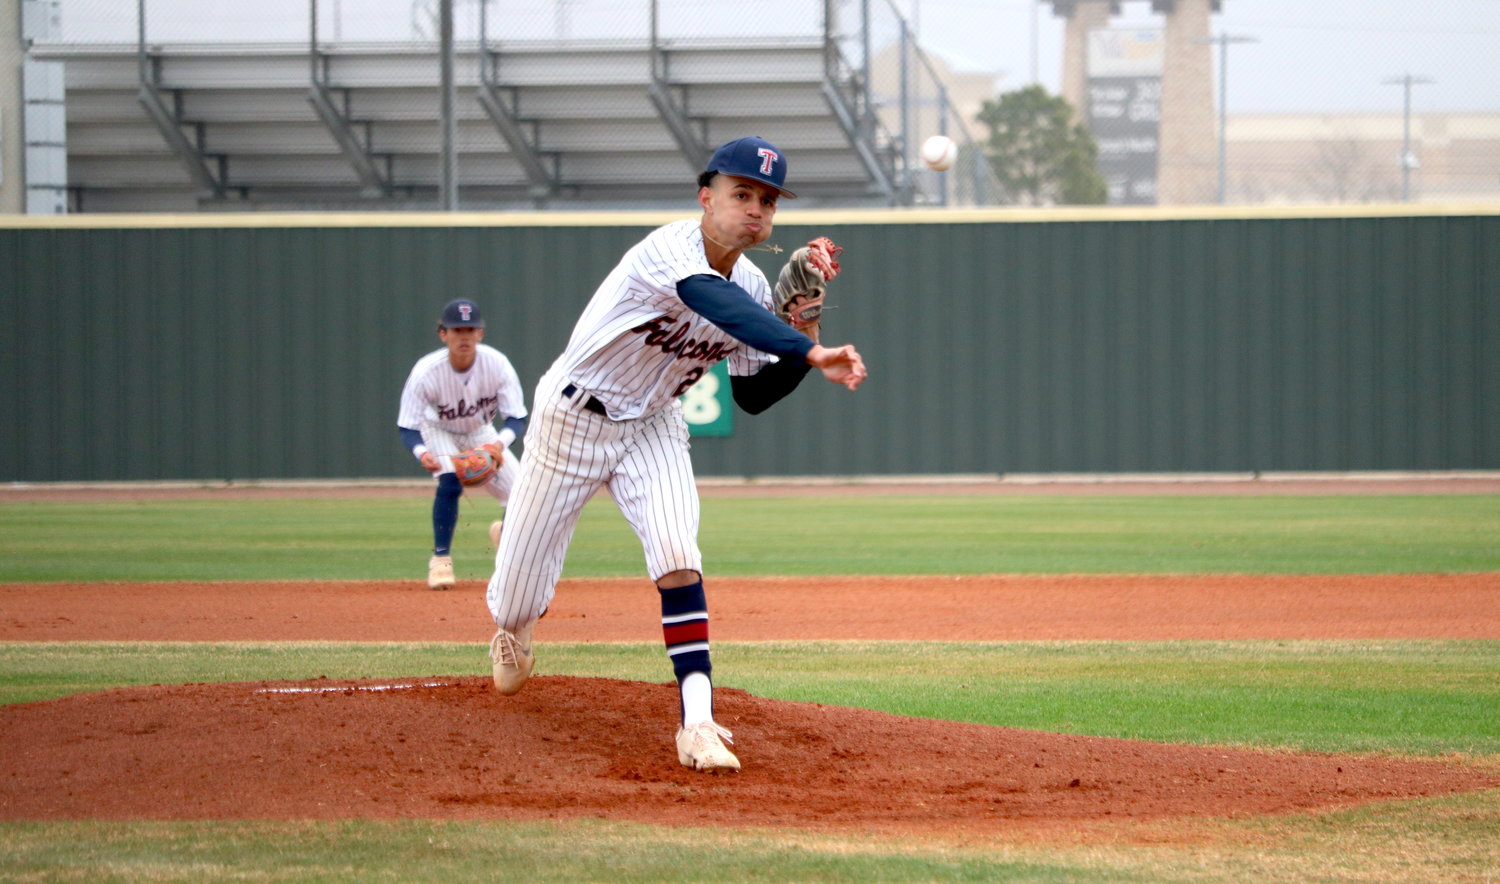 Trevor Esparza pitches during Thursday’s game between Tompkins and San Antonio Reagan at the Tompkins baseball field.